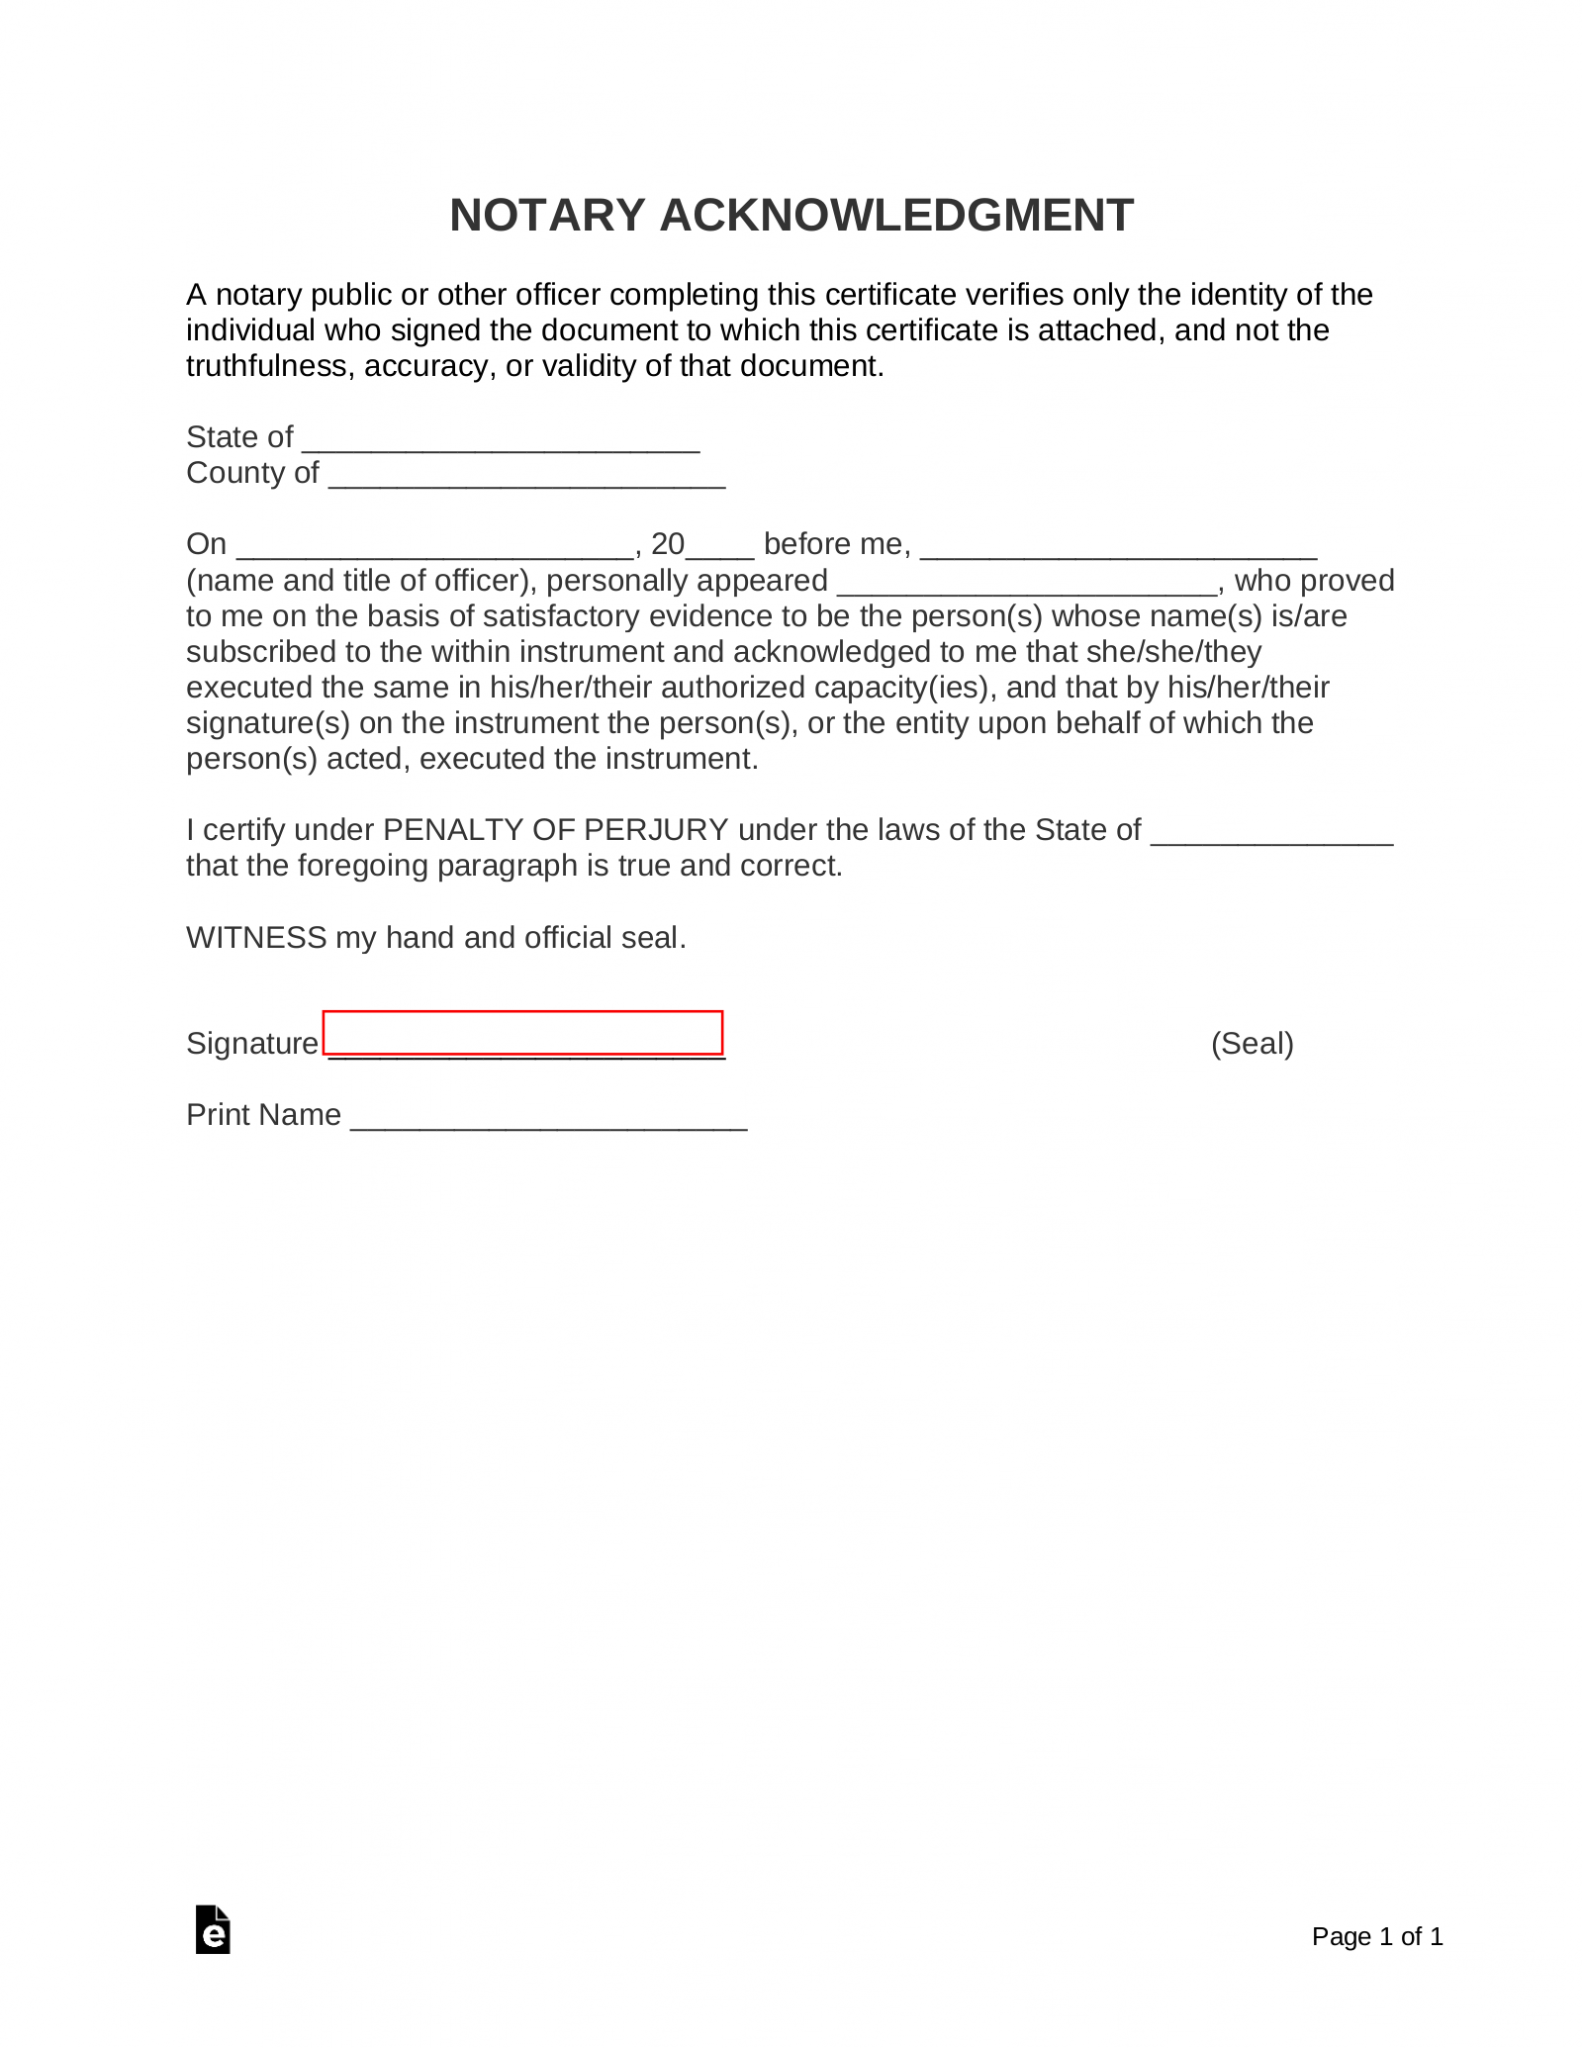 notarized statement template